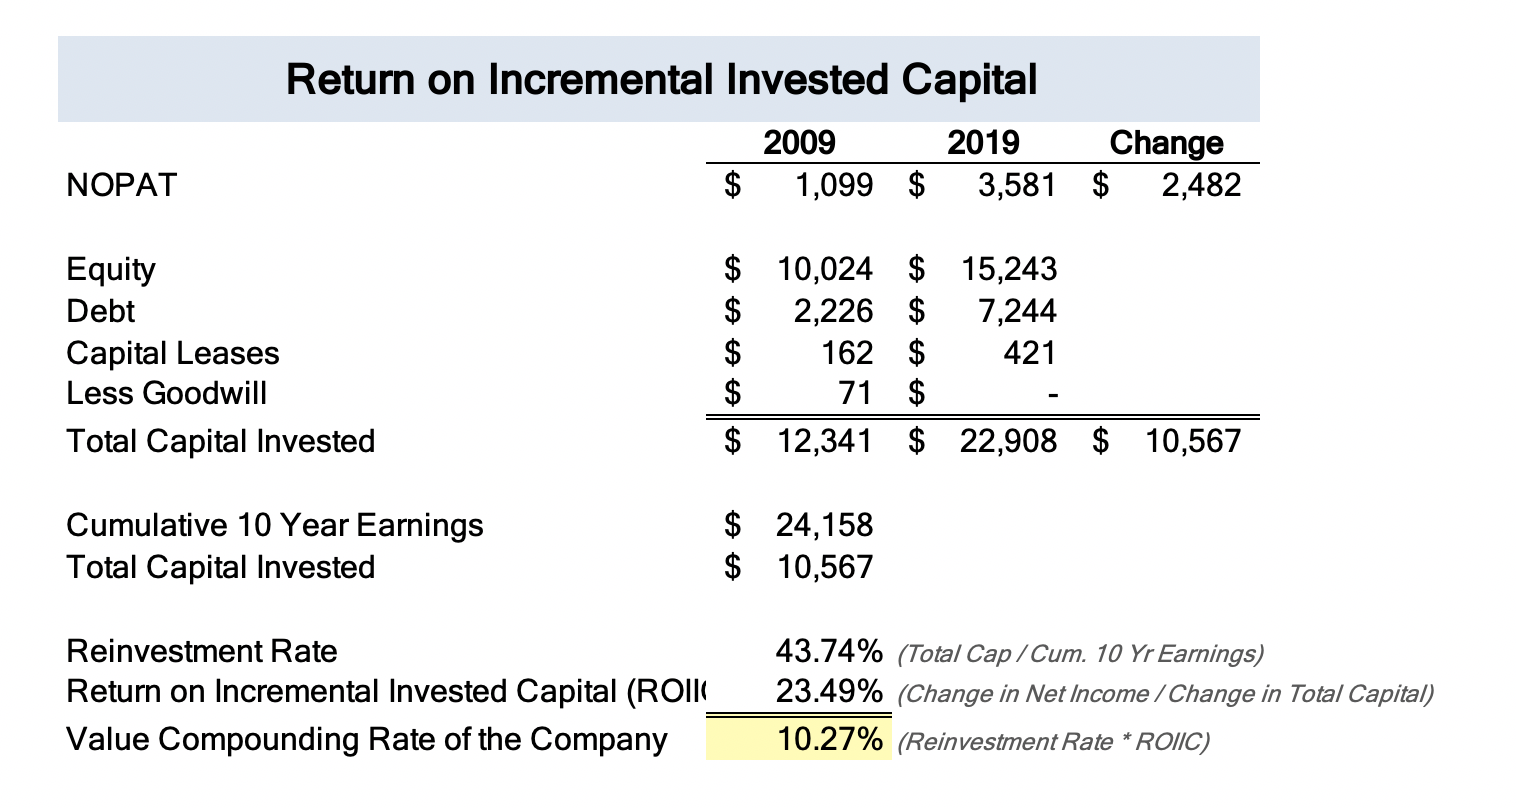 return on incremental invested capital calculation